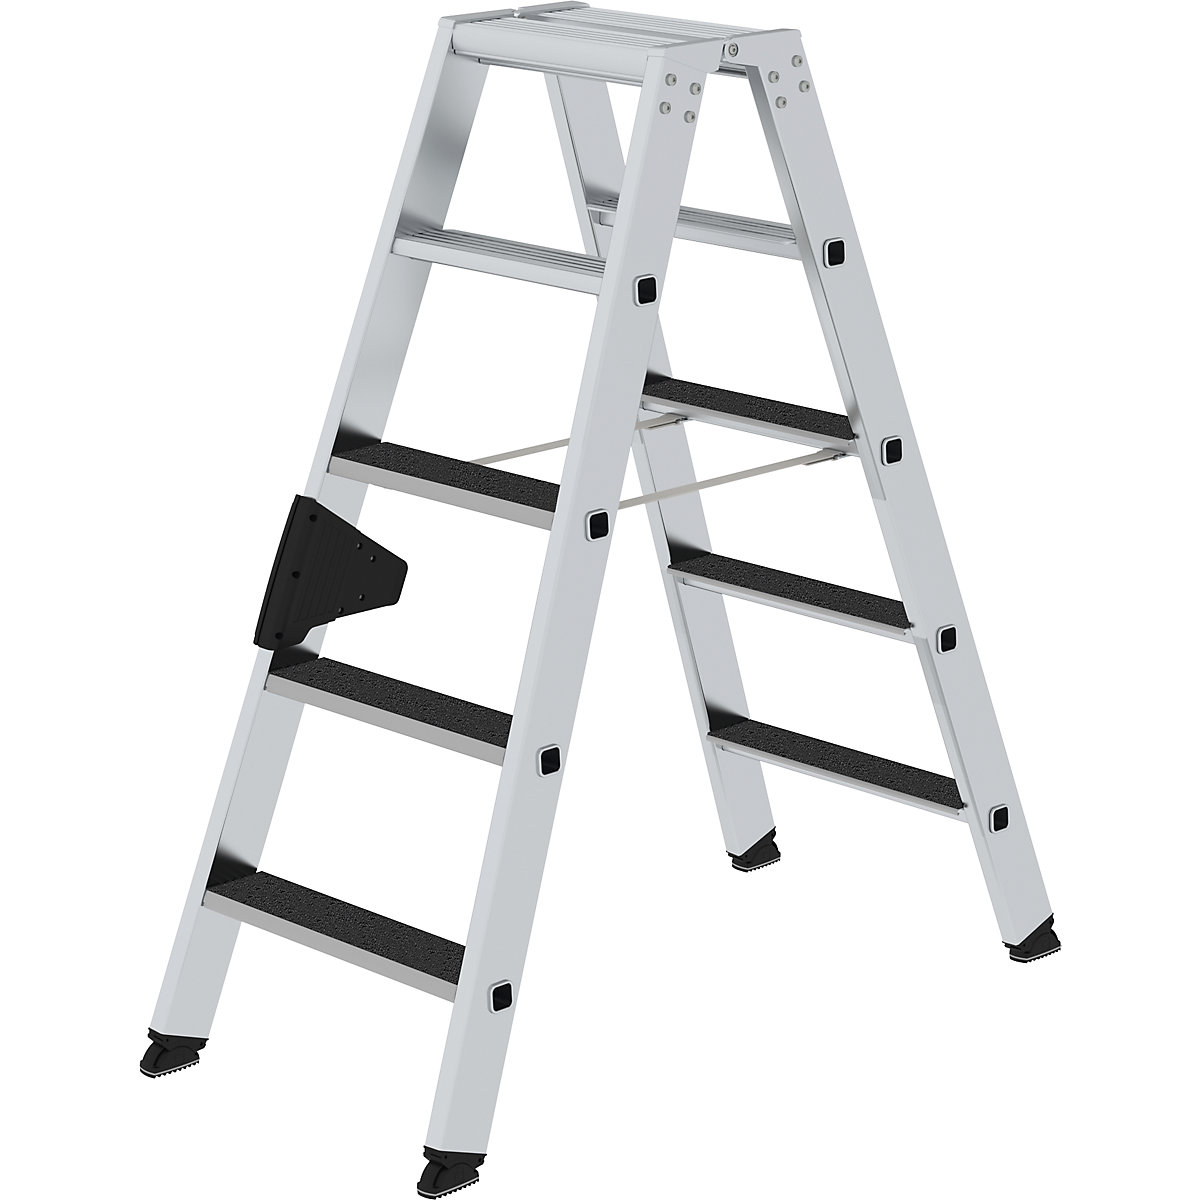 CLIP-STEP step ladder – MUNK, double sided access, slip resistant R13, 2 x 5 steps-9